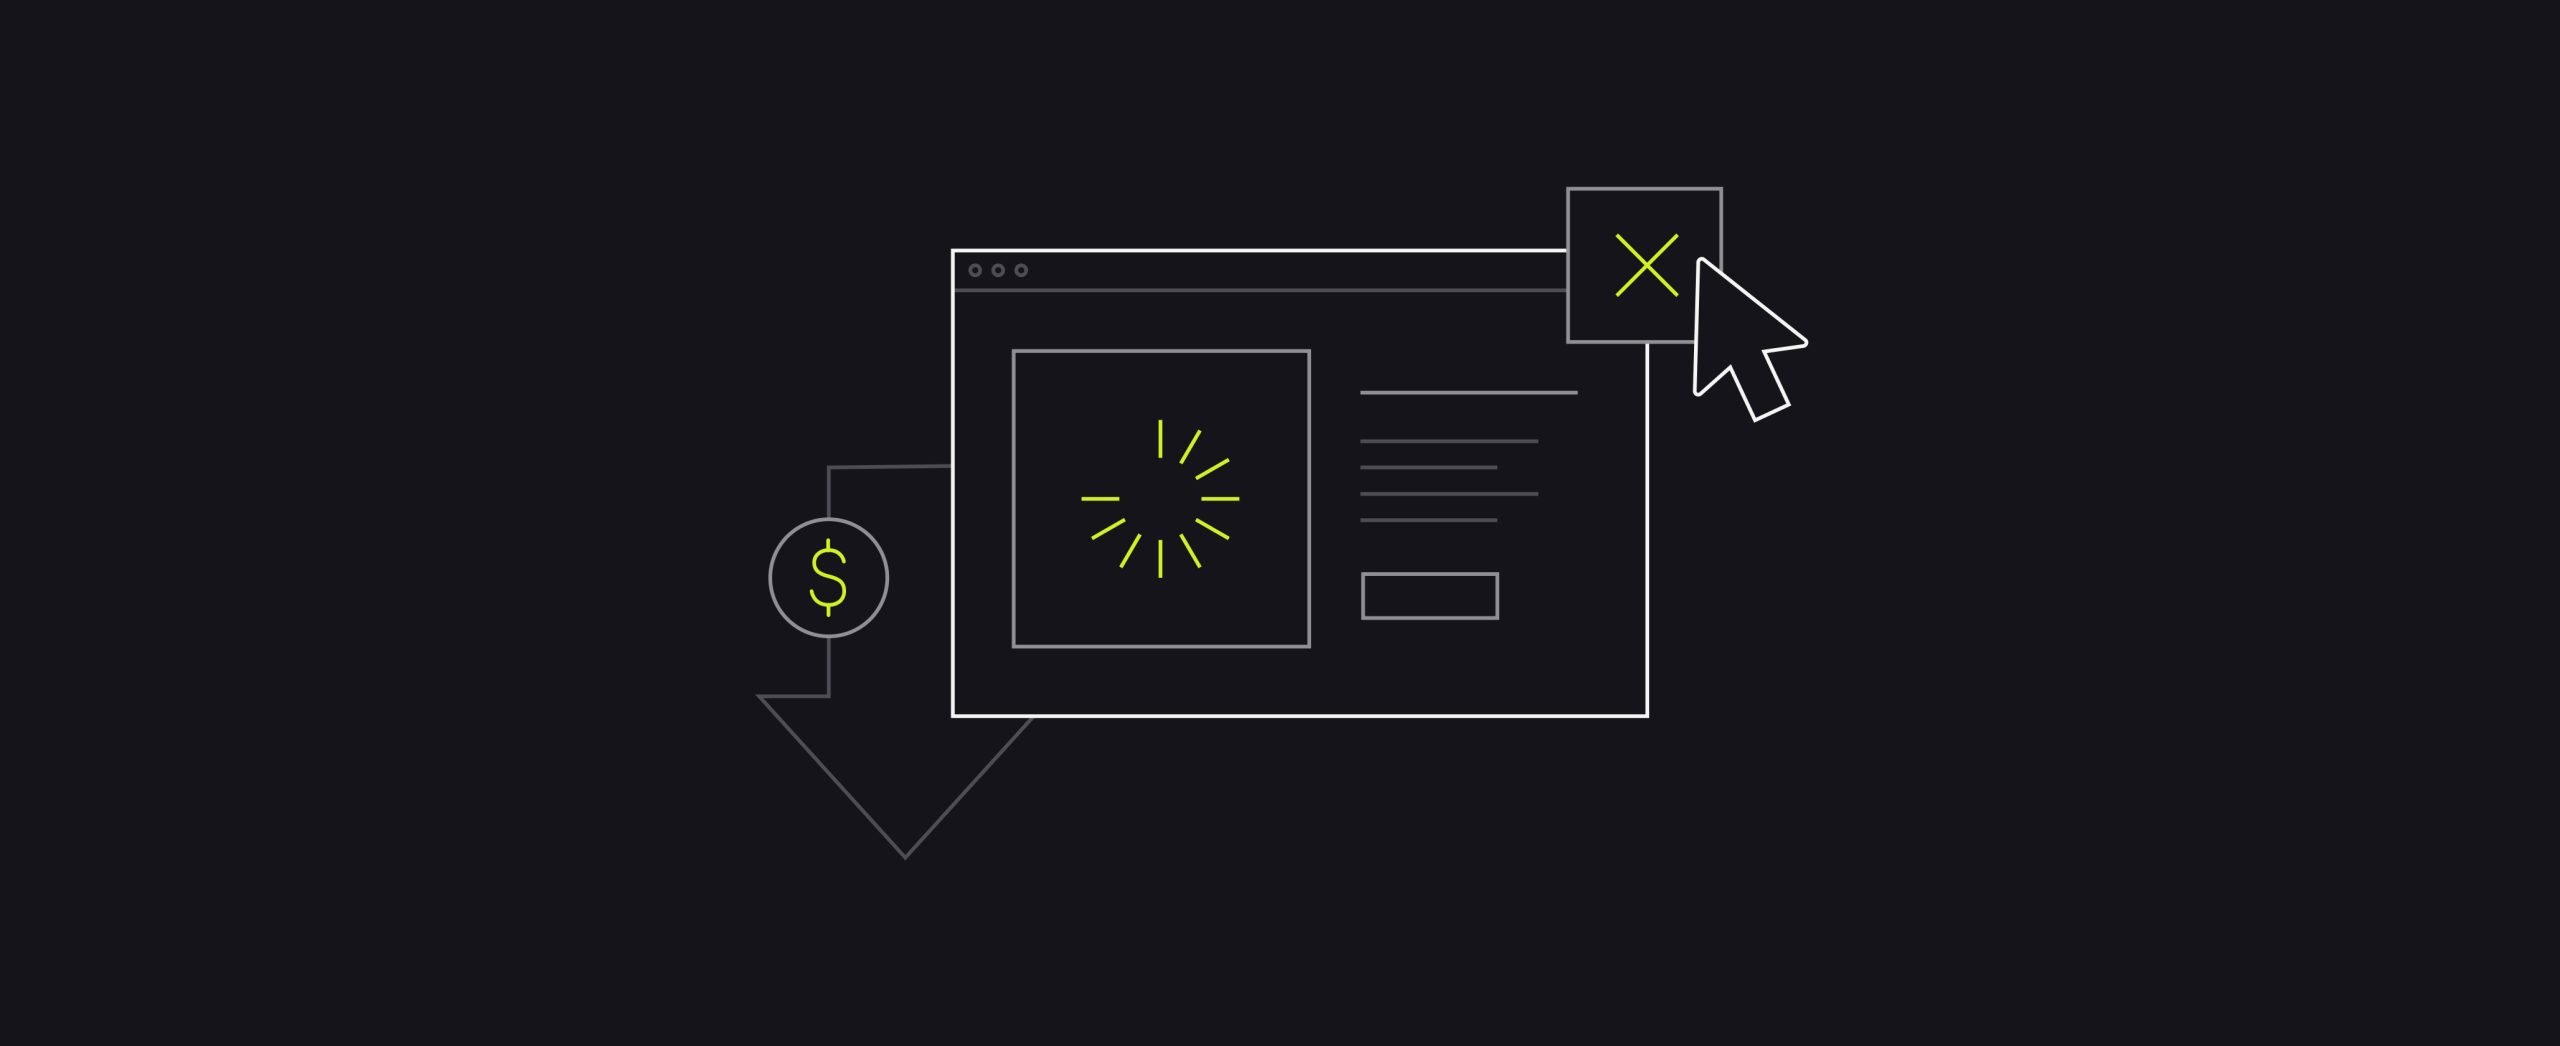 Shopify Plus Reduced Overhead Costs